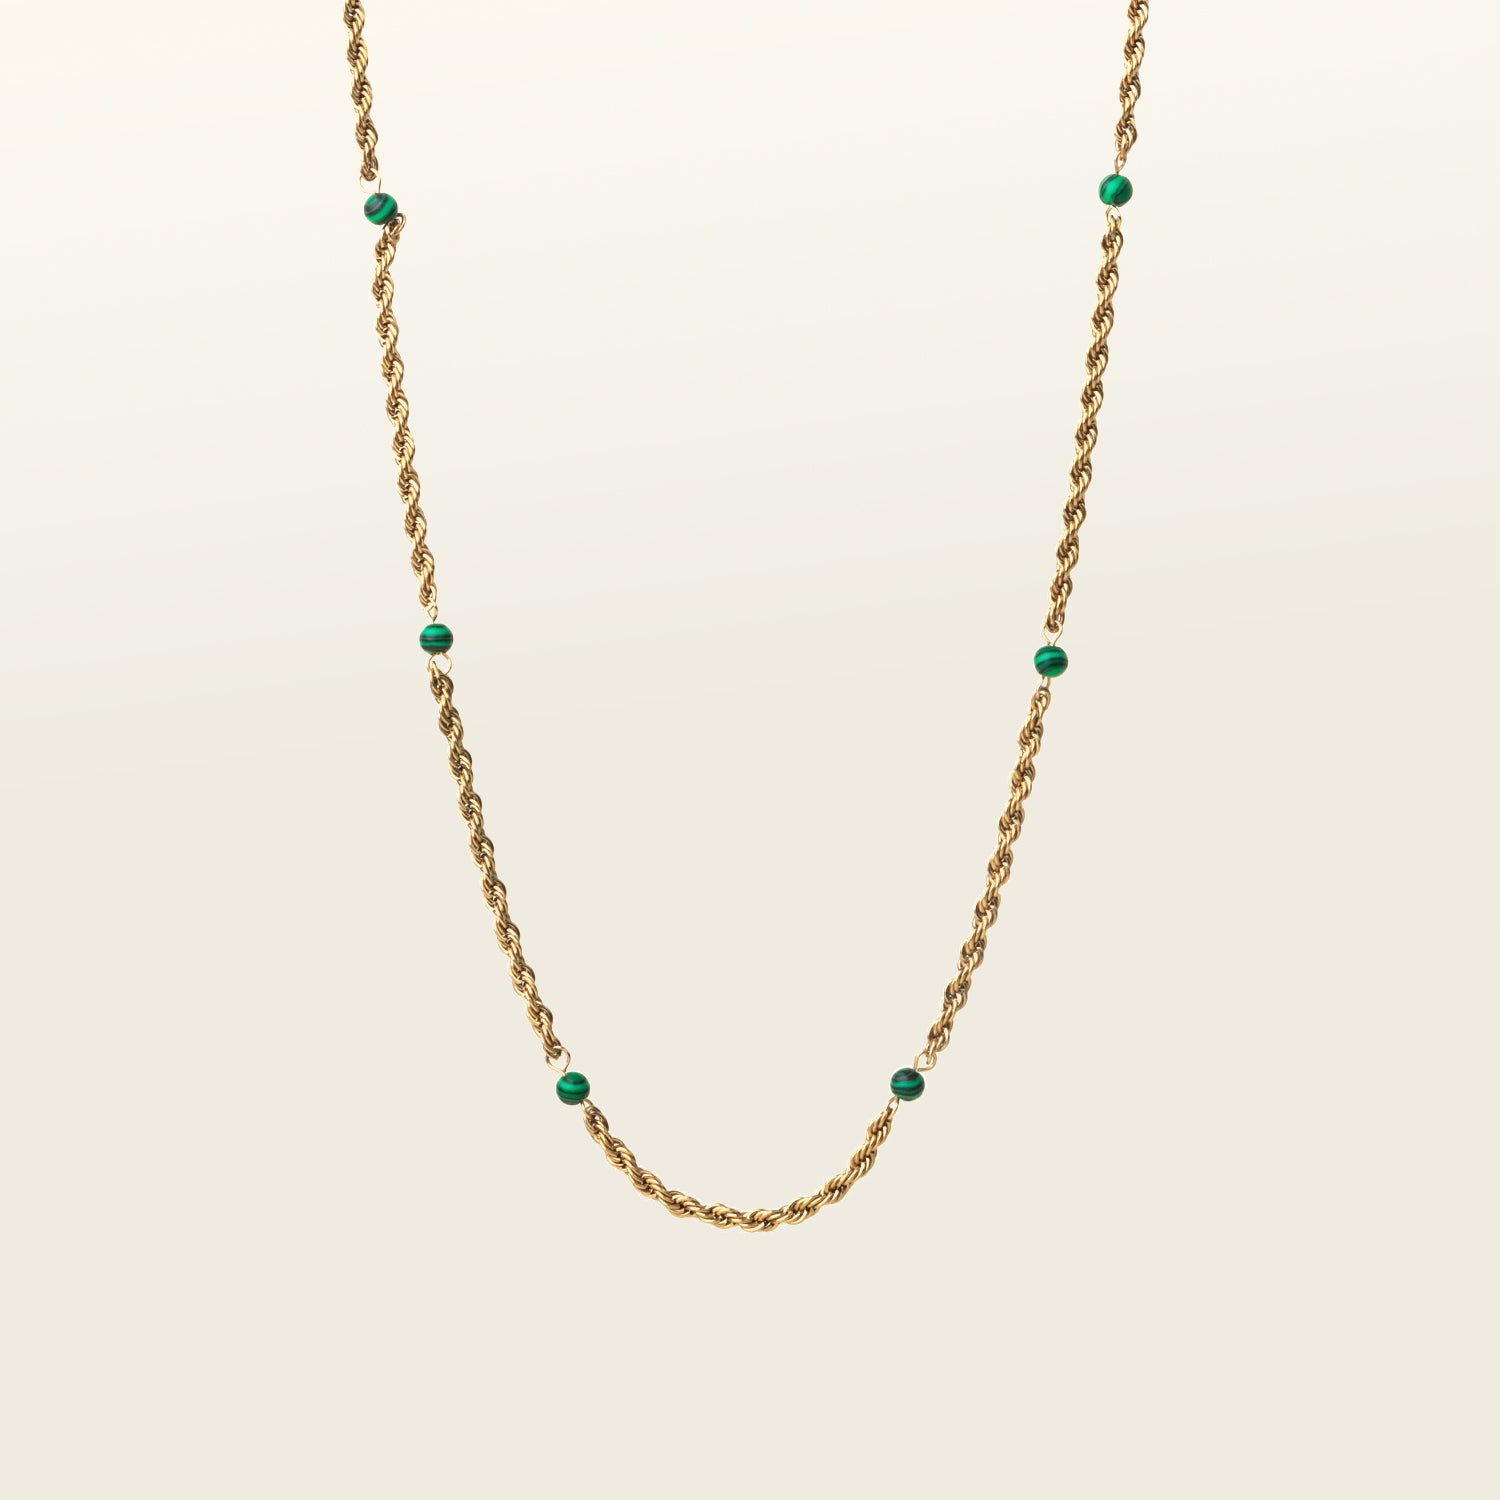 Image of the Cyrus Chain Necklace features adjustable sizing and is constructed with 18K gold-plated stainless steel and natural malachite stone for a durable, non-tarnish, and waterproof design. Please note that this item is one necklace.